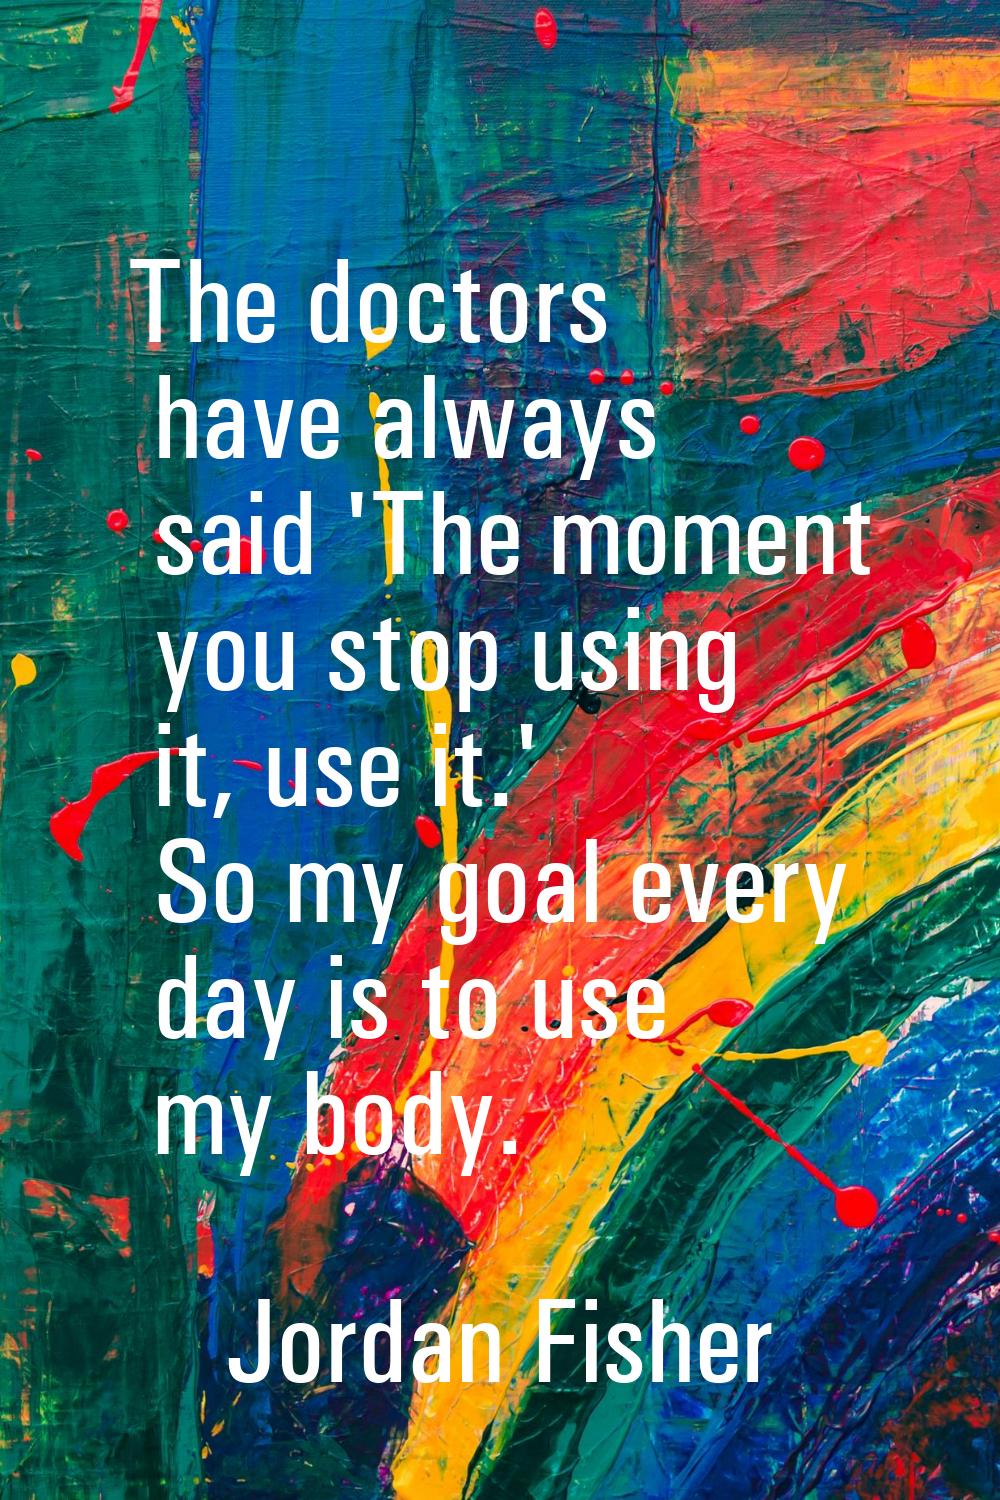 The doctors have always said 'The moment you stop using it, use it.' So my goal every day is to use